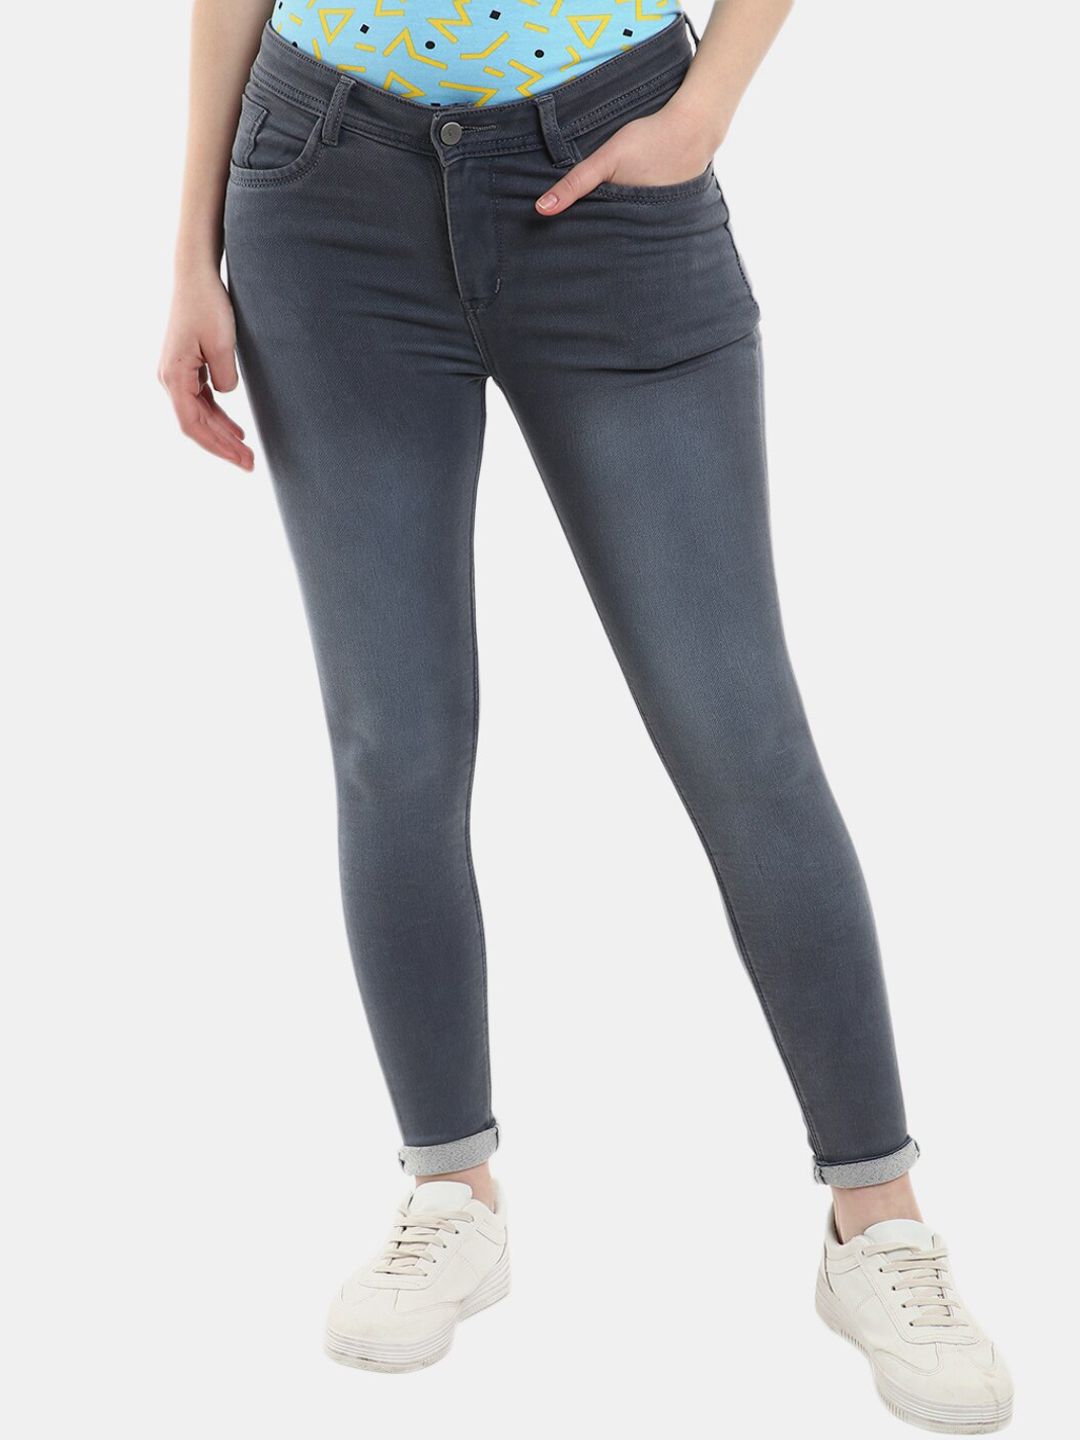 V-Mart Women Grey Classic Light Fade Jeans Price in India